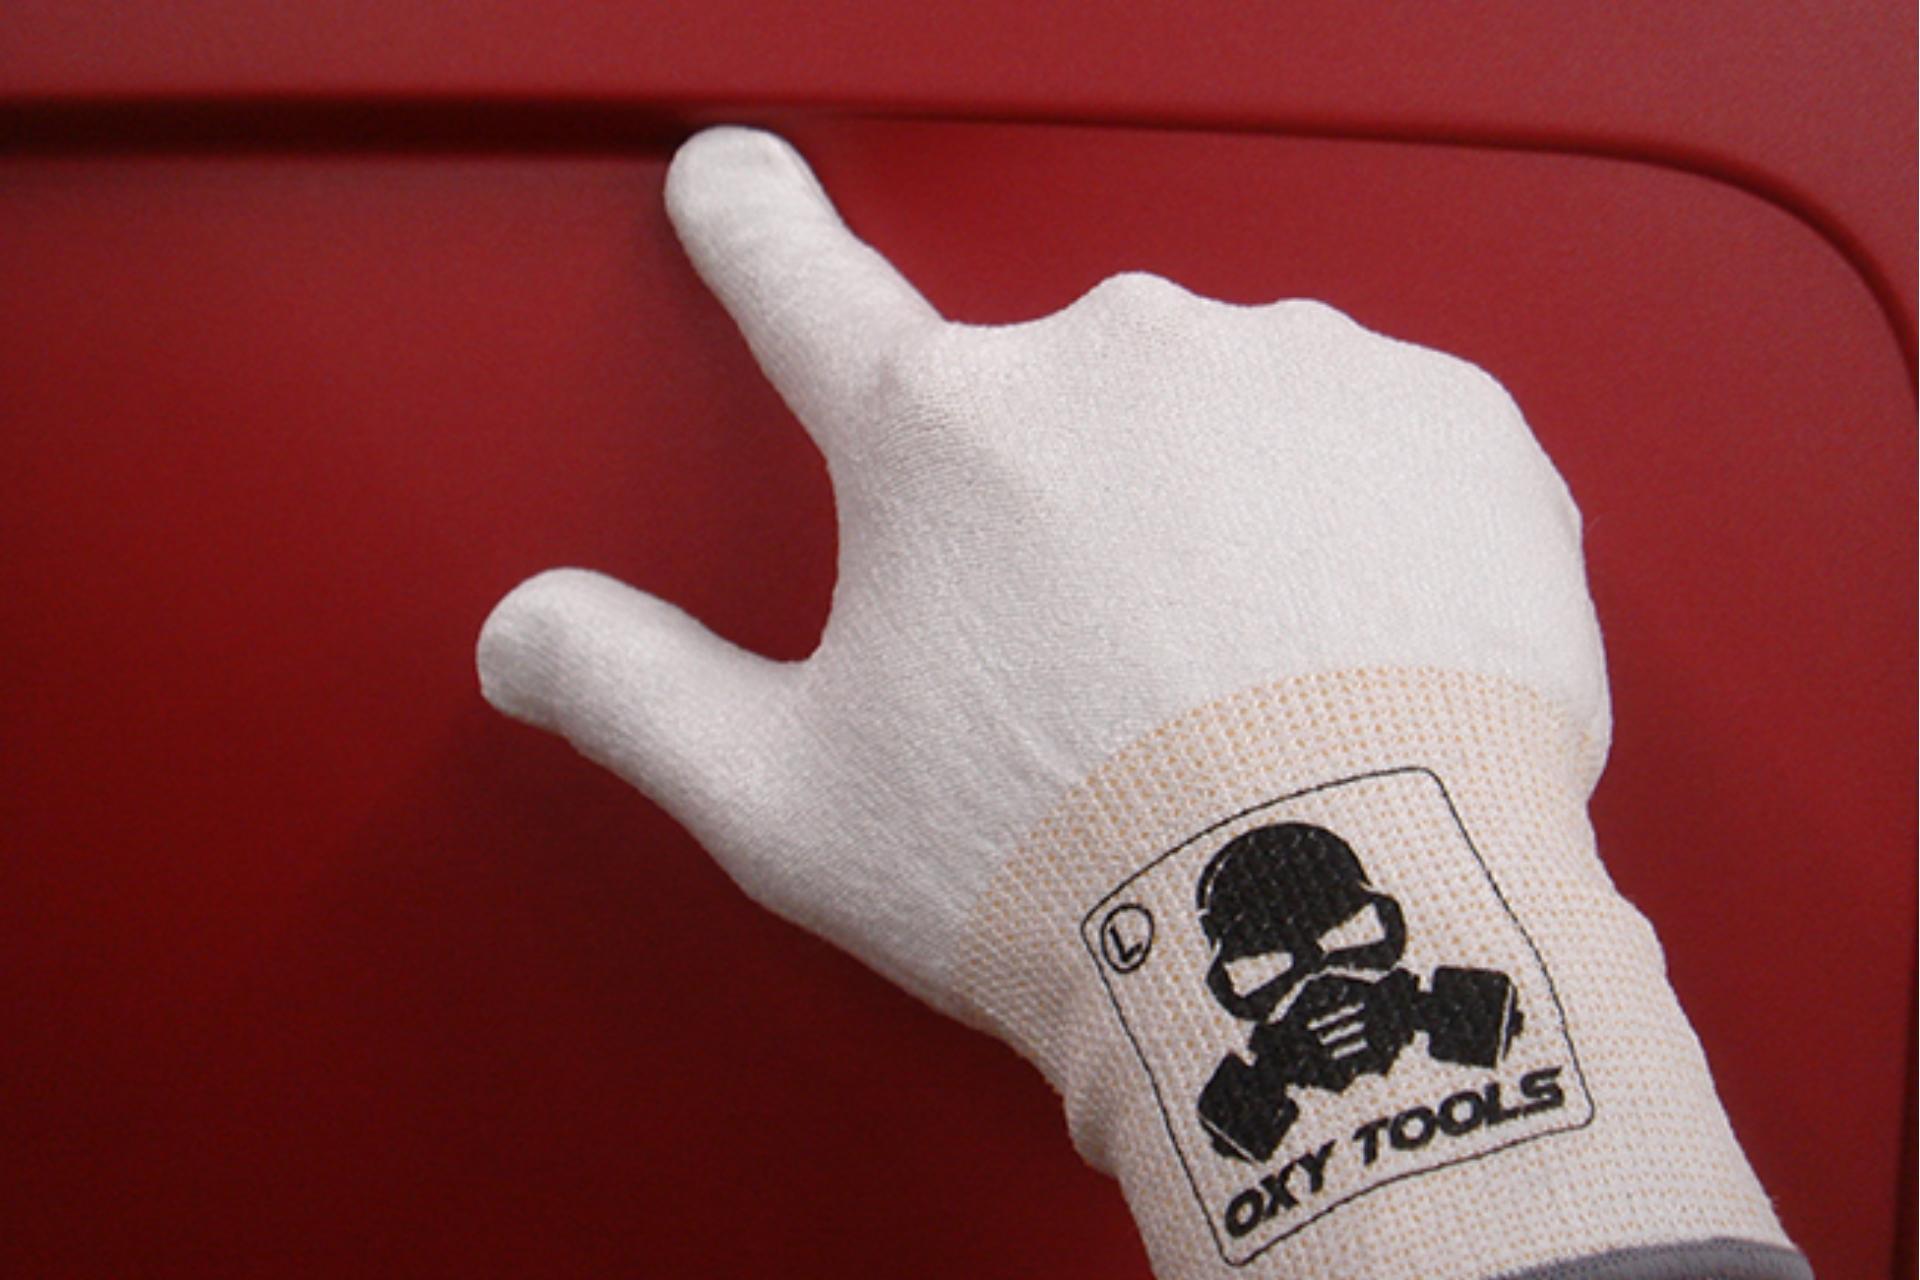 Foto: Oxy Tools Revolution Wrapping Glove - Größe: S